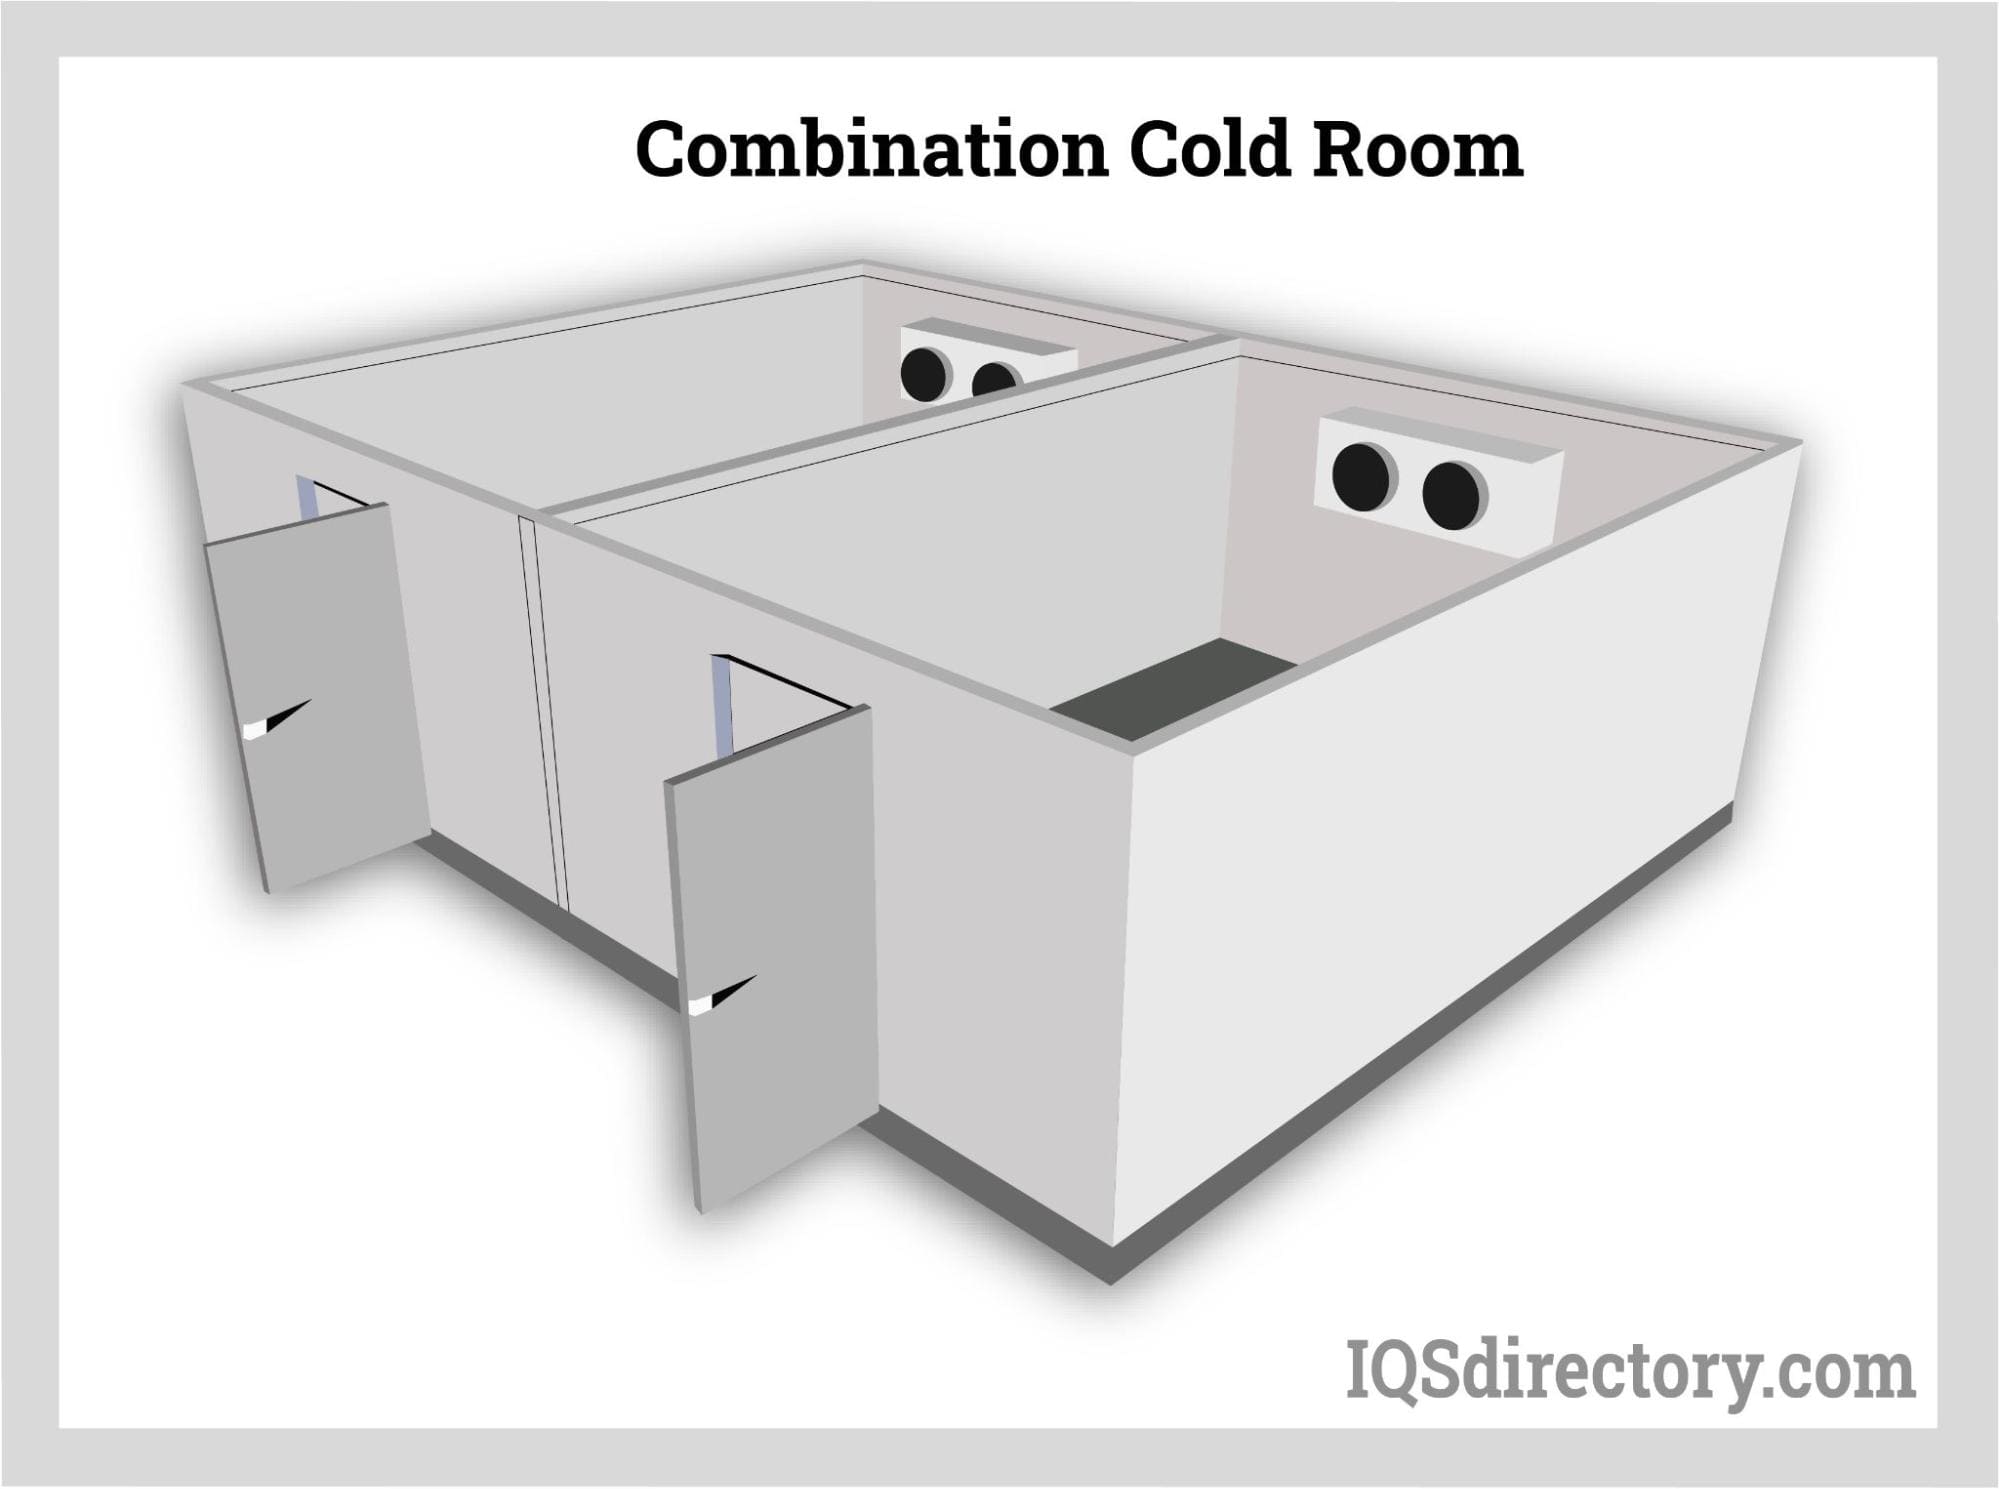 Combination Cold Room